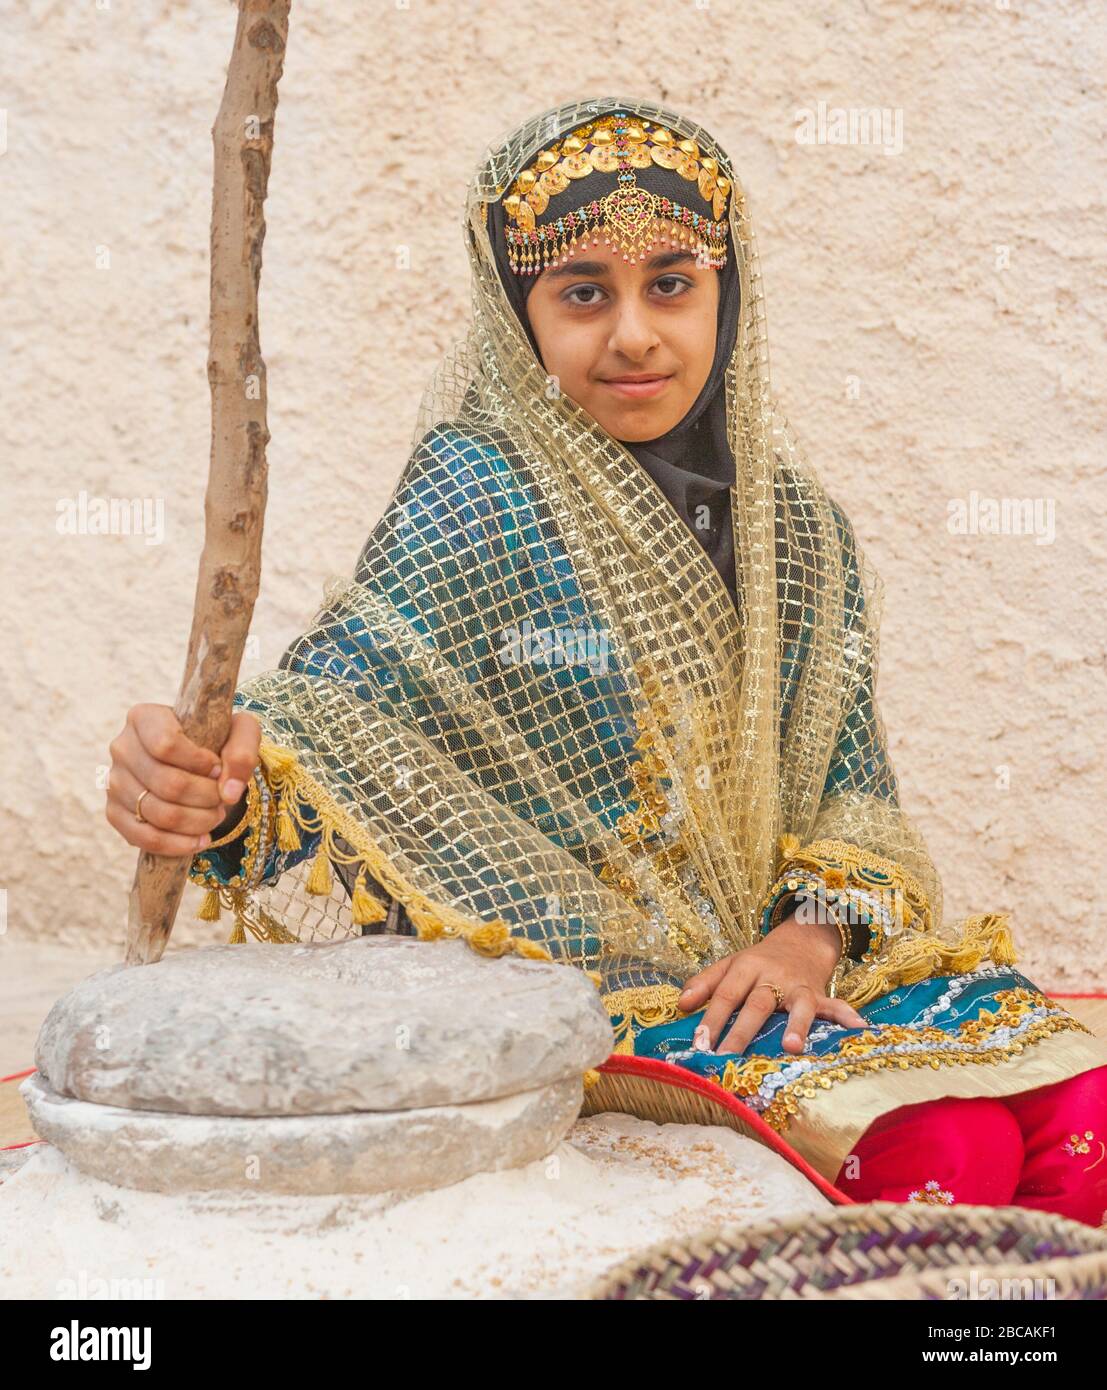 Portrait of an unidentified young woman in traditional Omani tribal dress, relaxing next to a grinding stone. Stock Photo